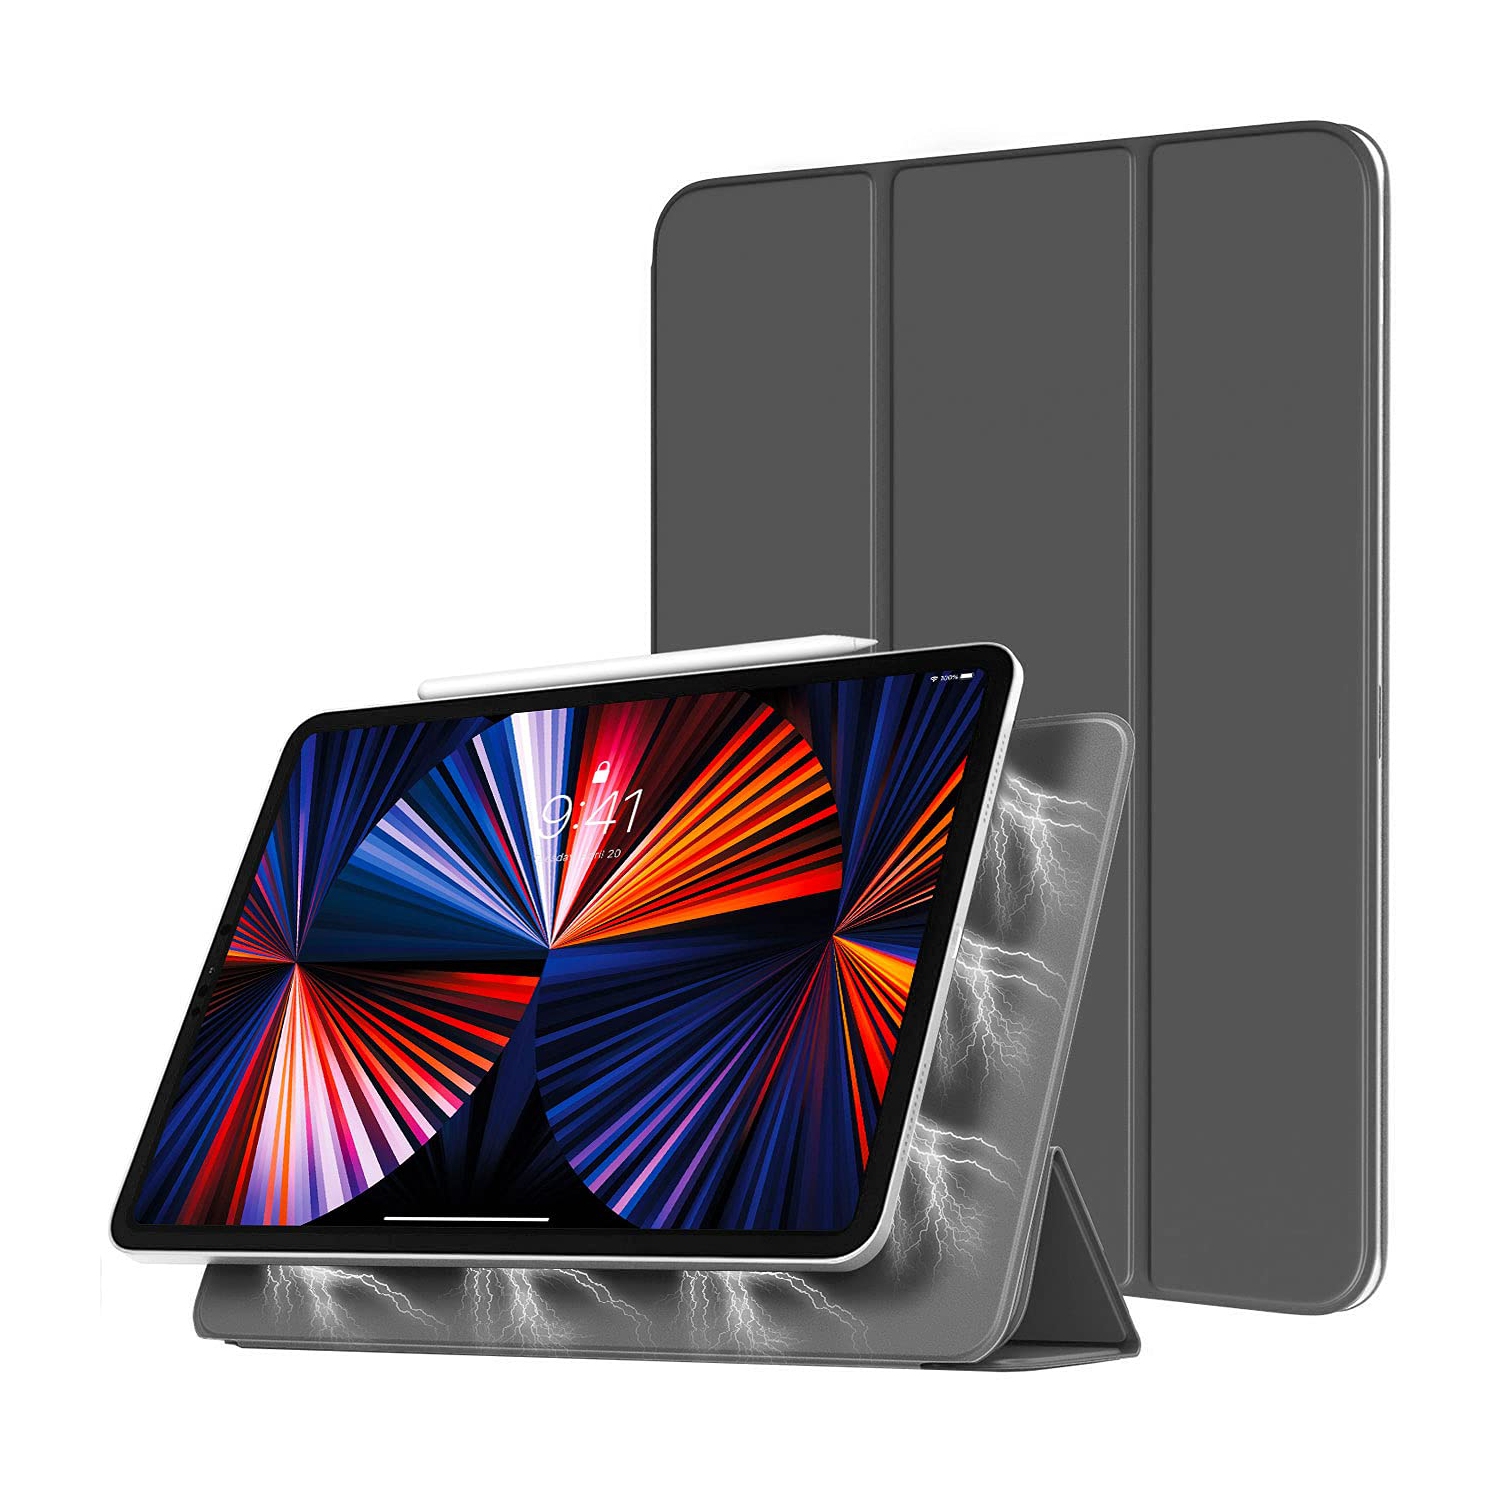 TiMOVO Case for New iPad Pro 12.9 inch 2021 (5th Gen), Support 2nd Gen APPLE Pencil Charging Strong Magnetic Trifold Stand